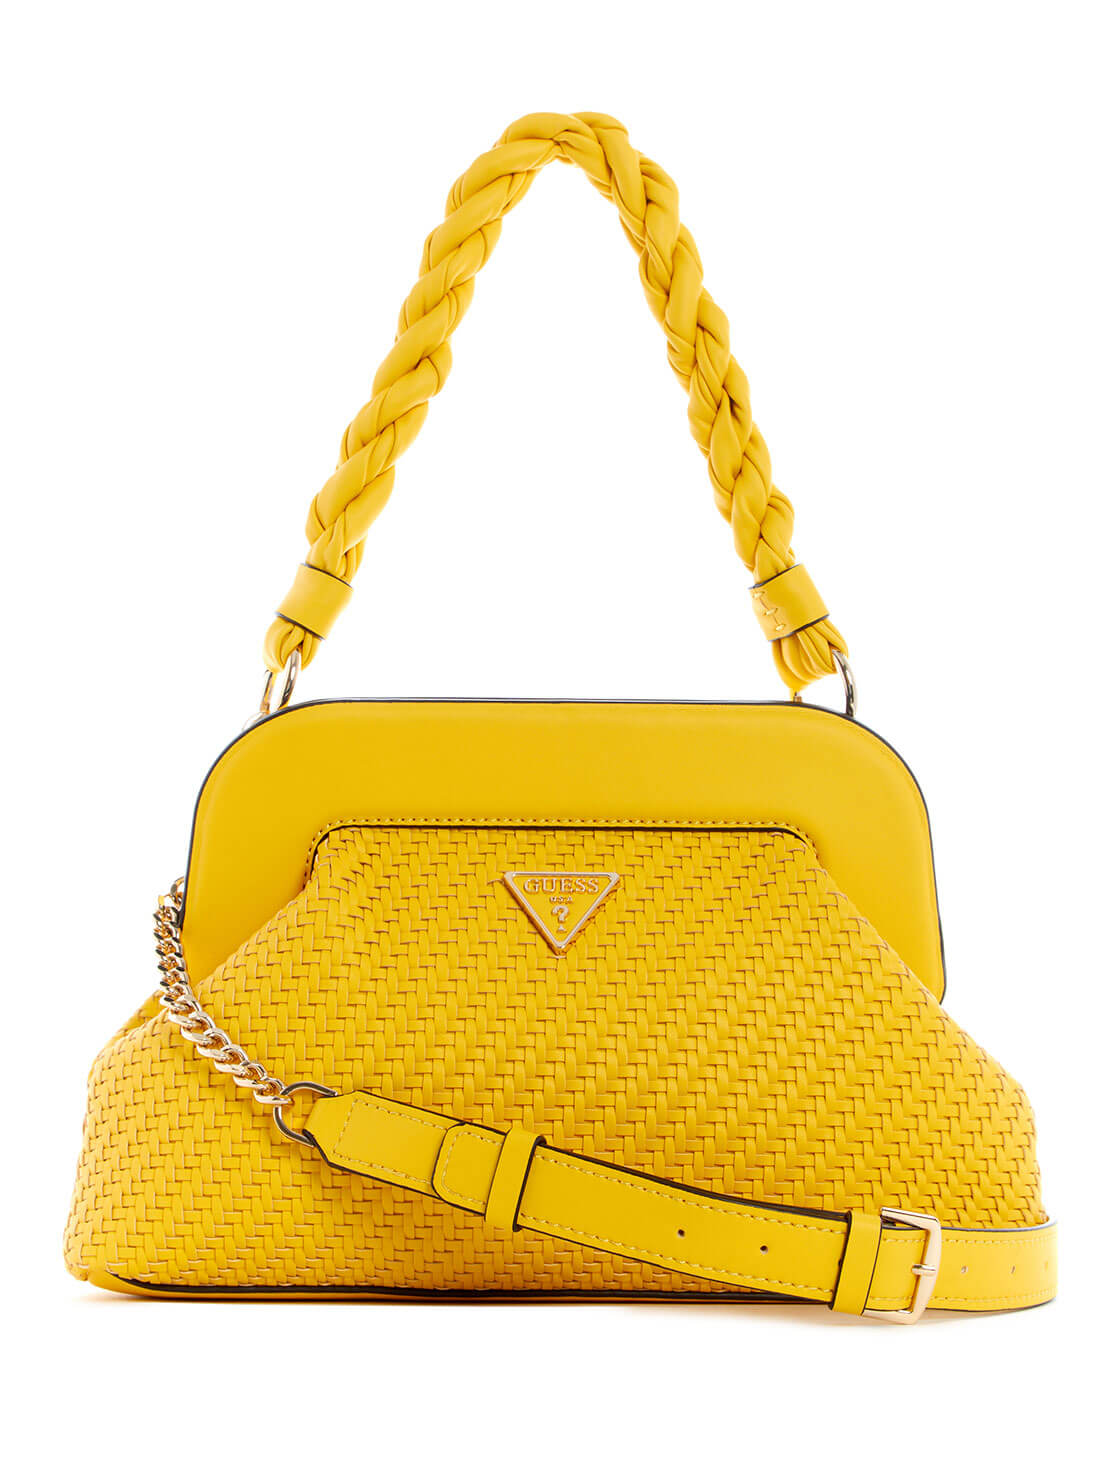 GUESS Womens Lemon Yellow Woven Hassie Frame Crossbody Bag VG839717 Front View